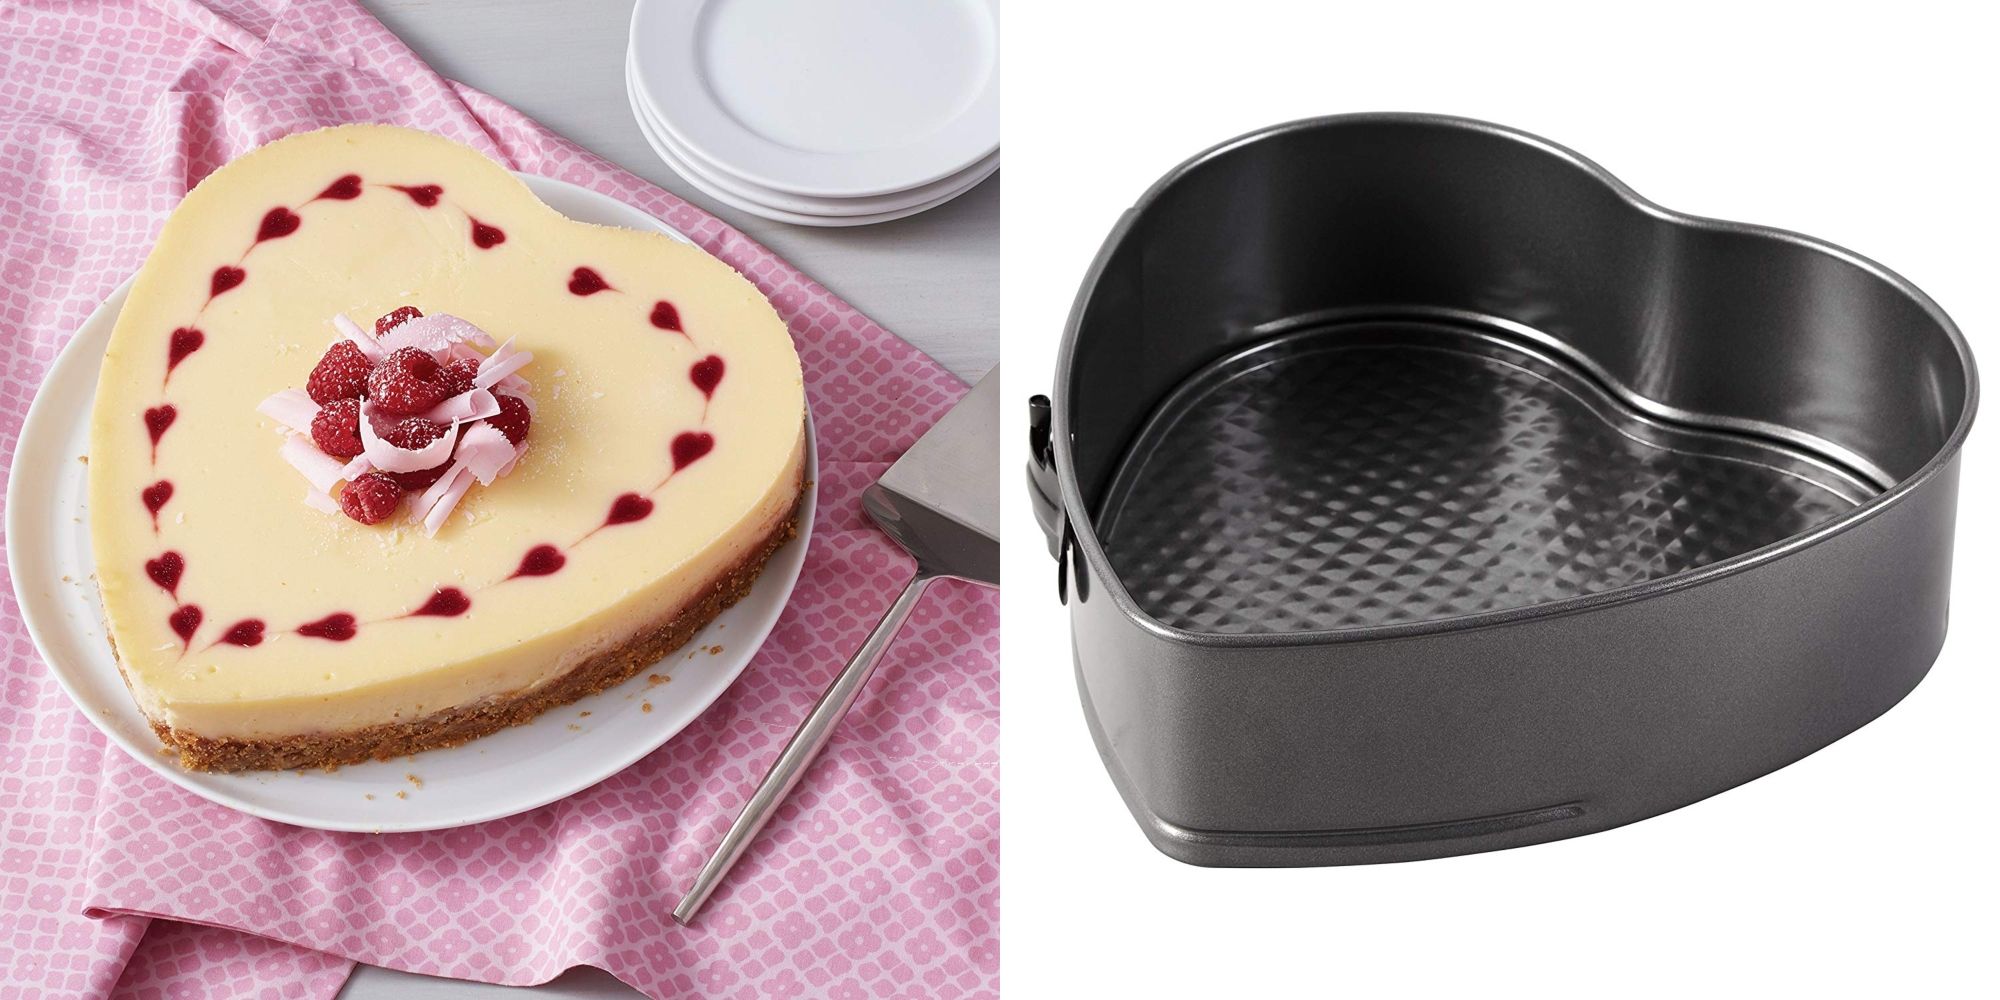 Shop This Nordic Ware Tiered Heart Bundt Cake Pan From Amazon For $34